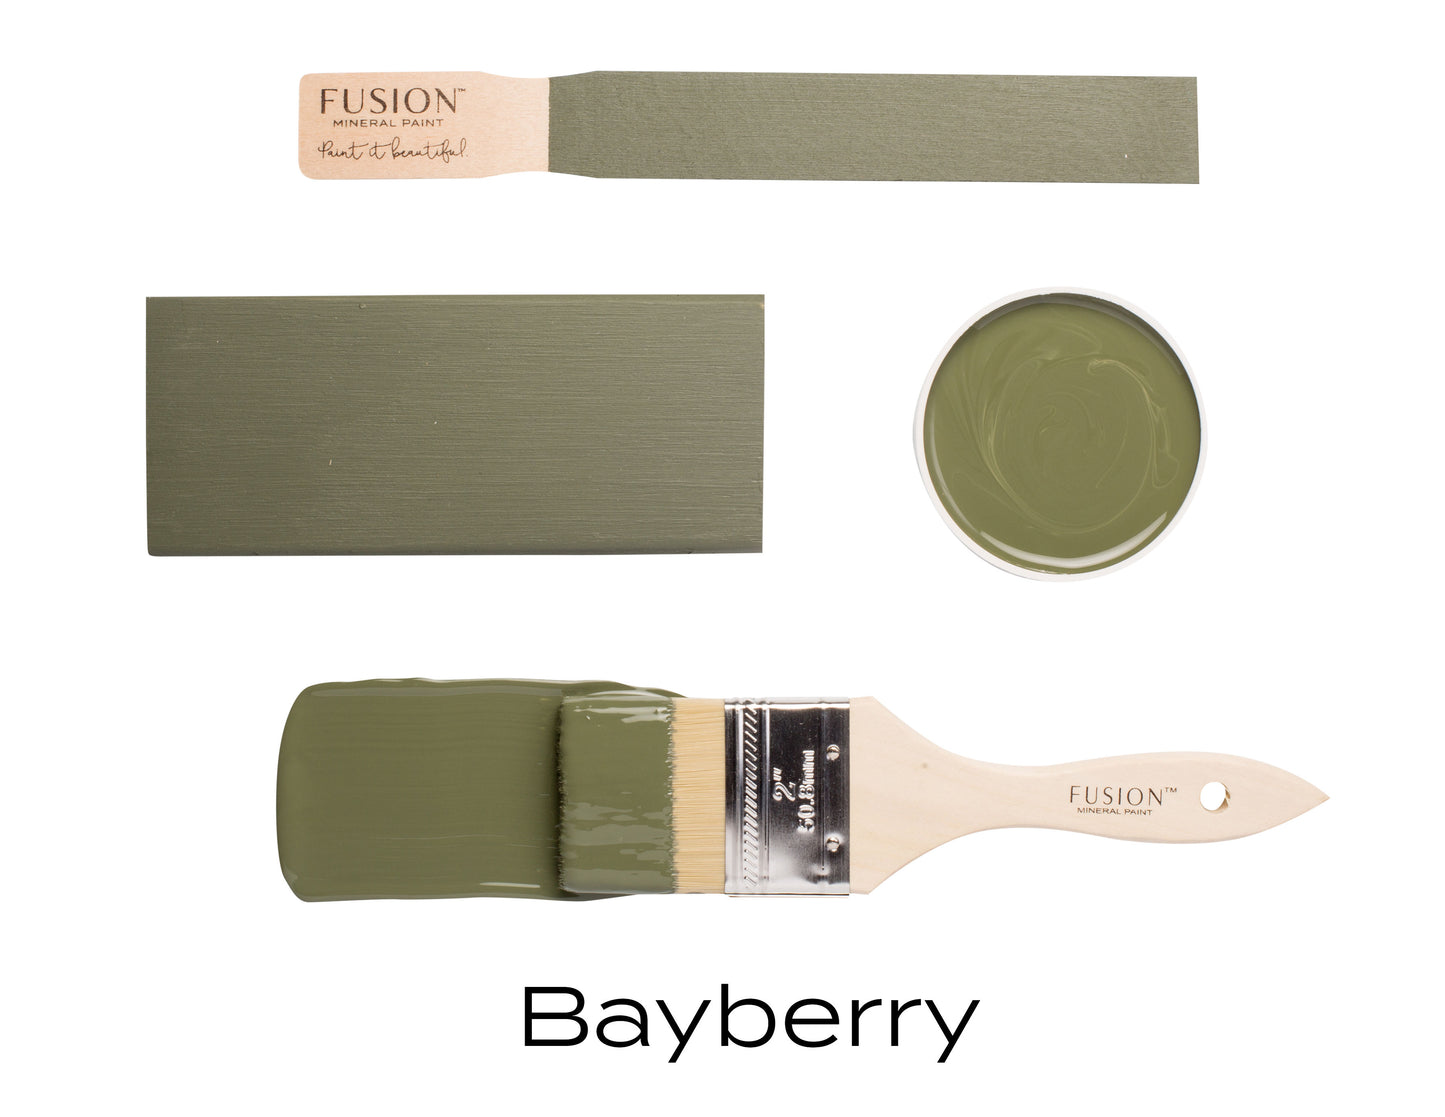 Bayberry by Fusion